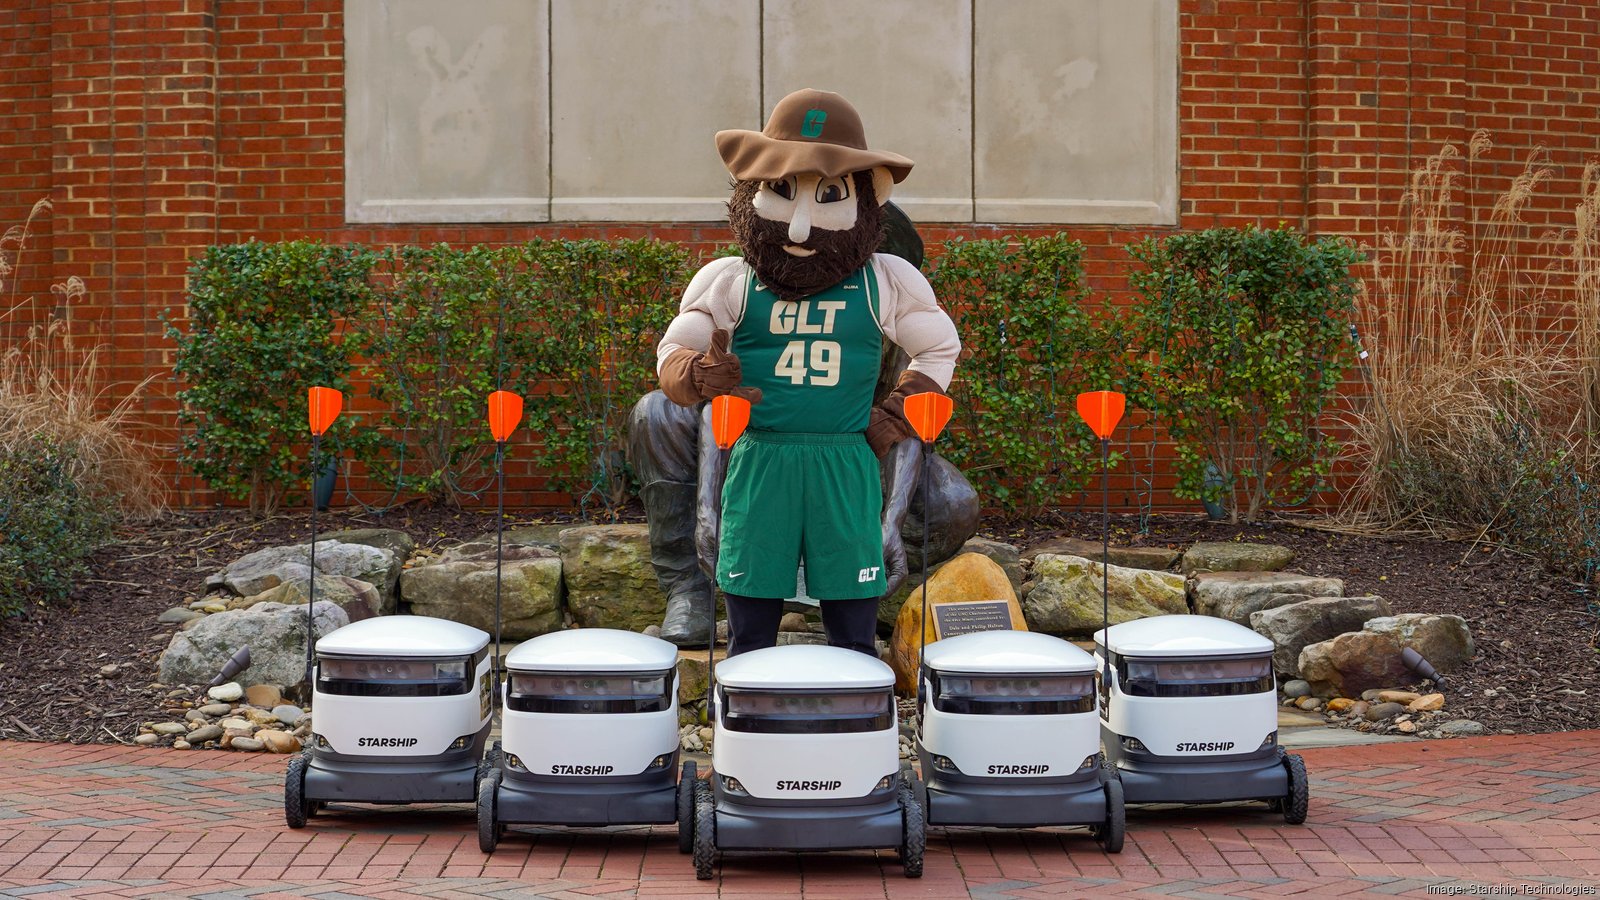 Charlotte Inno - San Starship Technologies rolls out robot delivery service at UNC